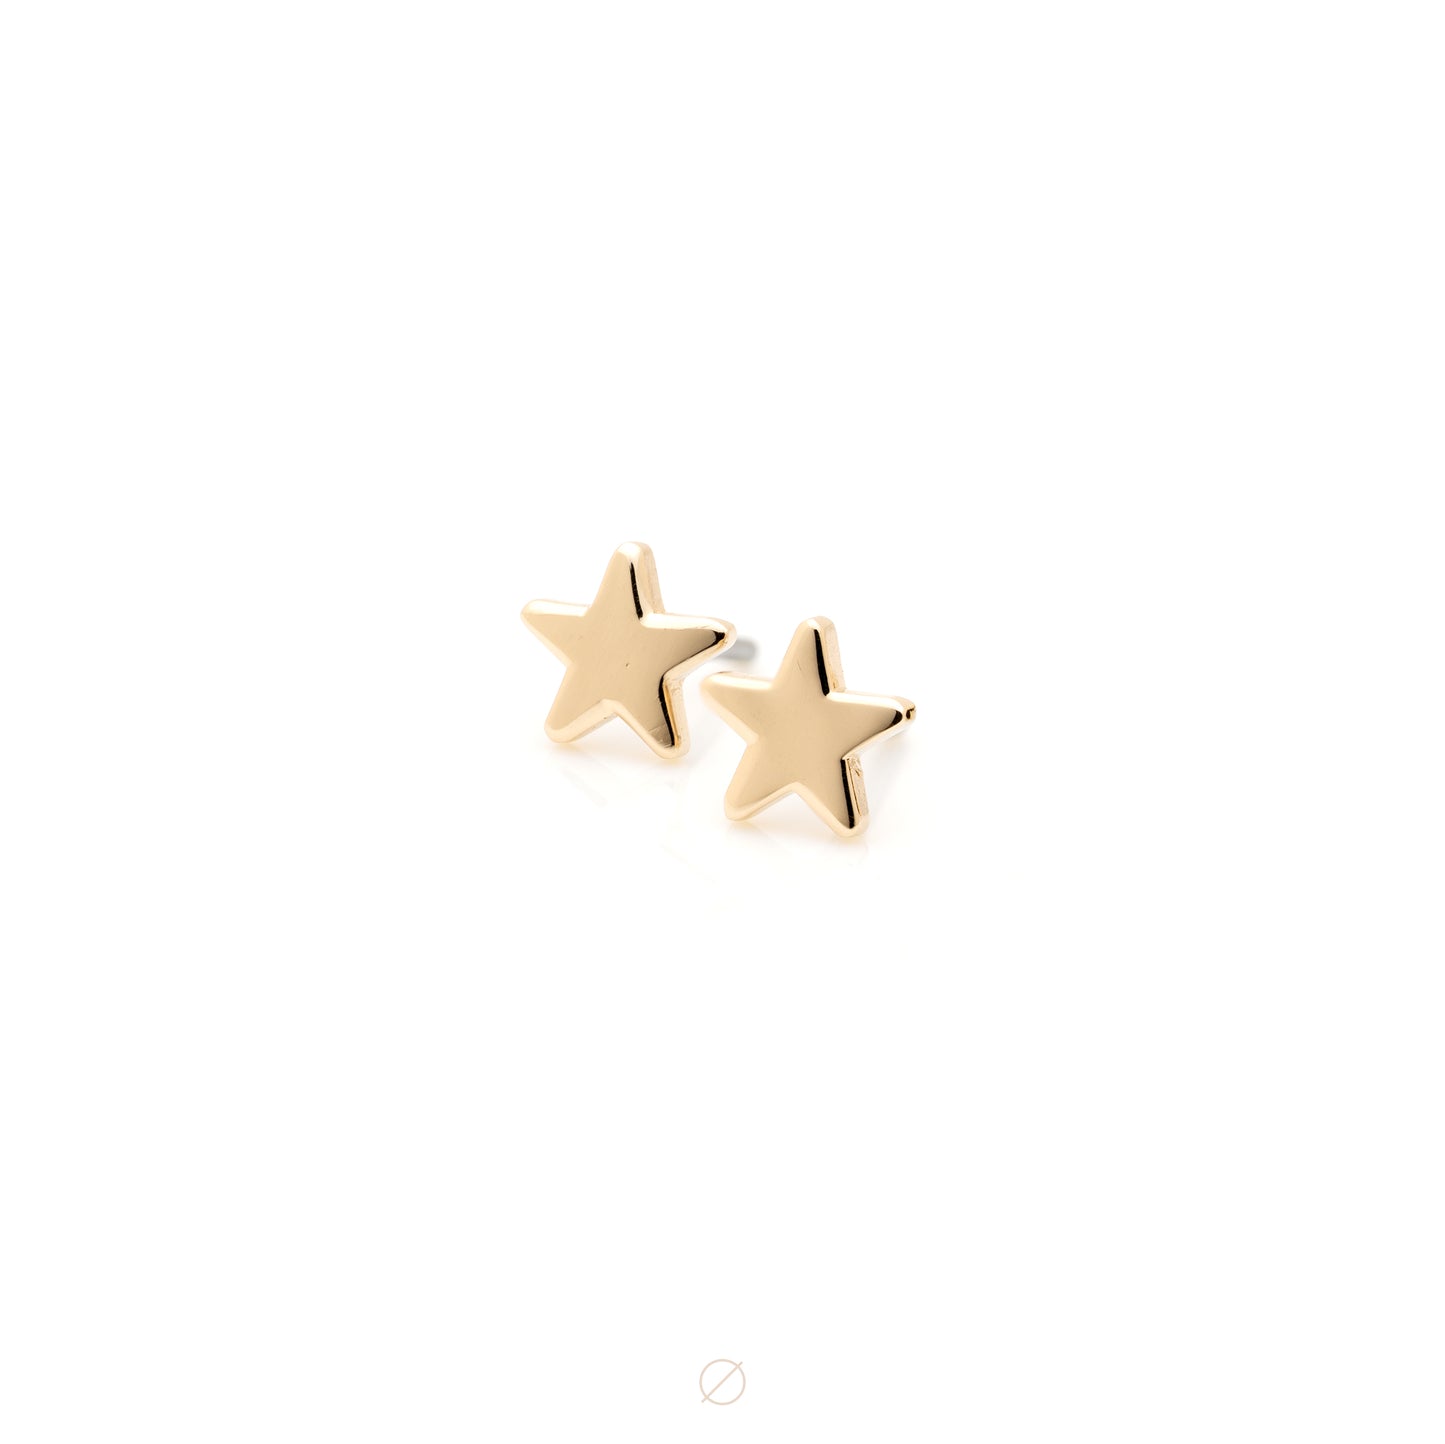 Star Press-Fit End by Alchemy Adornment